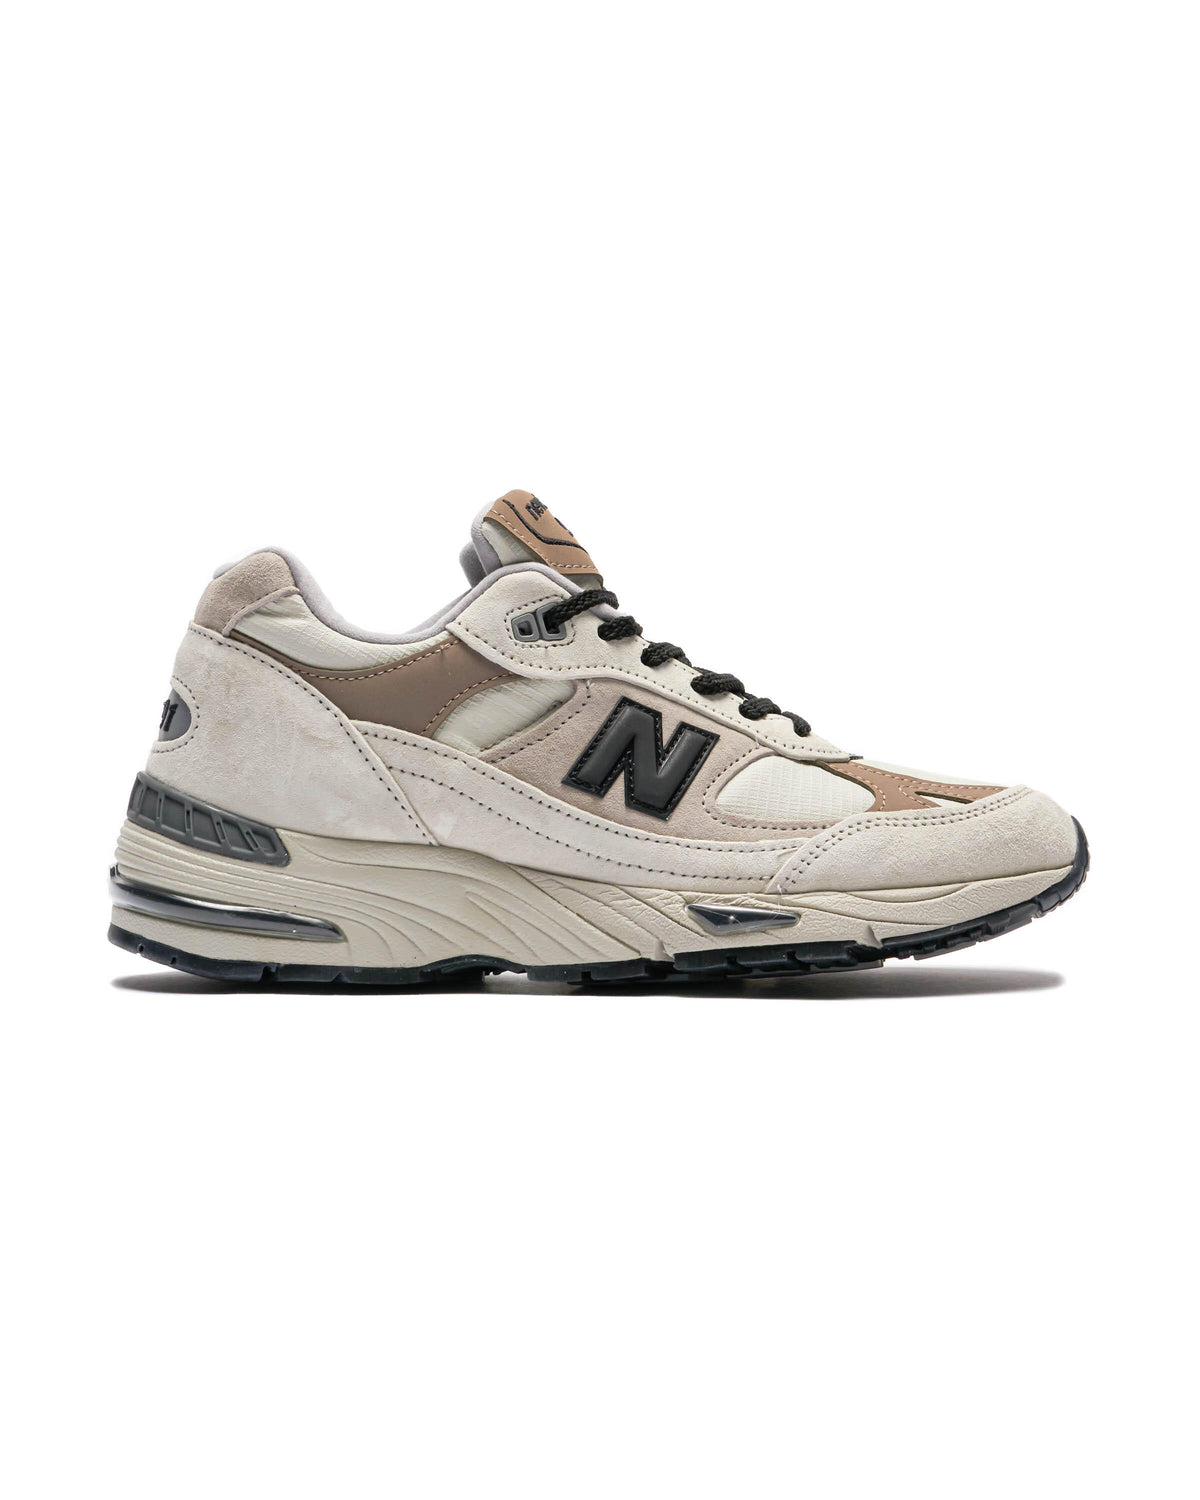 New Balance M 991 WIN - Made in England